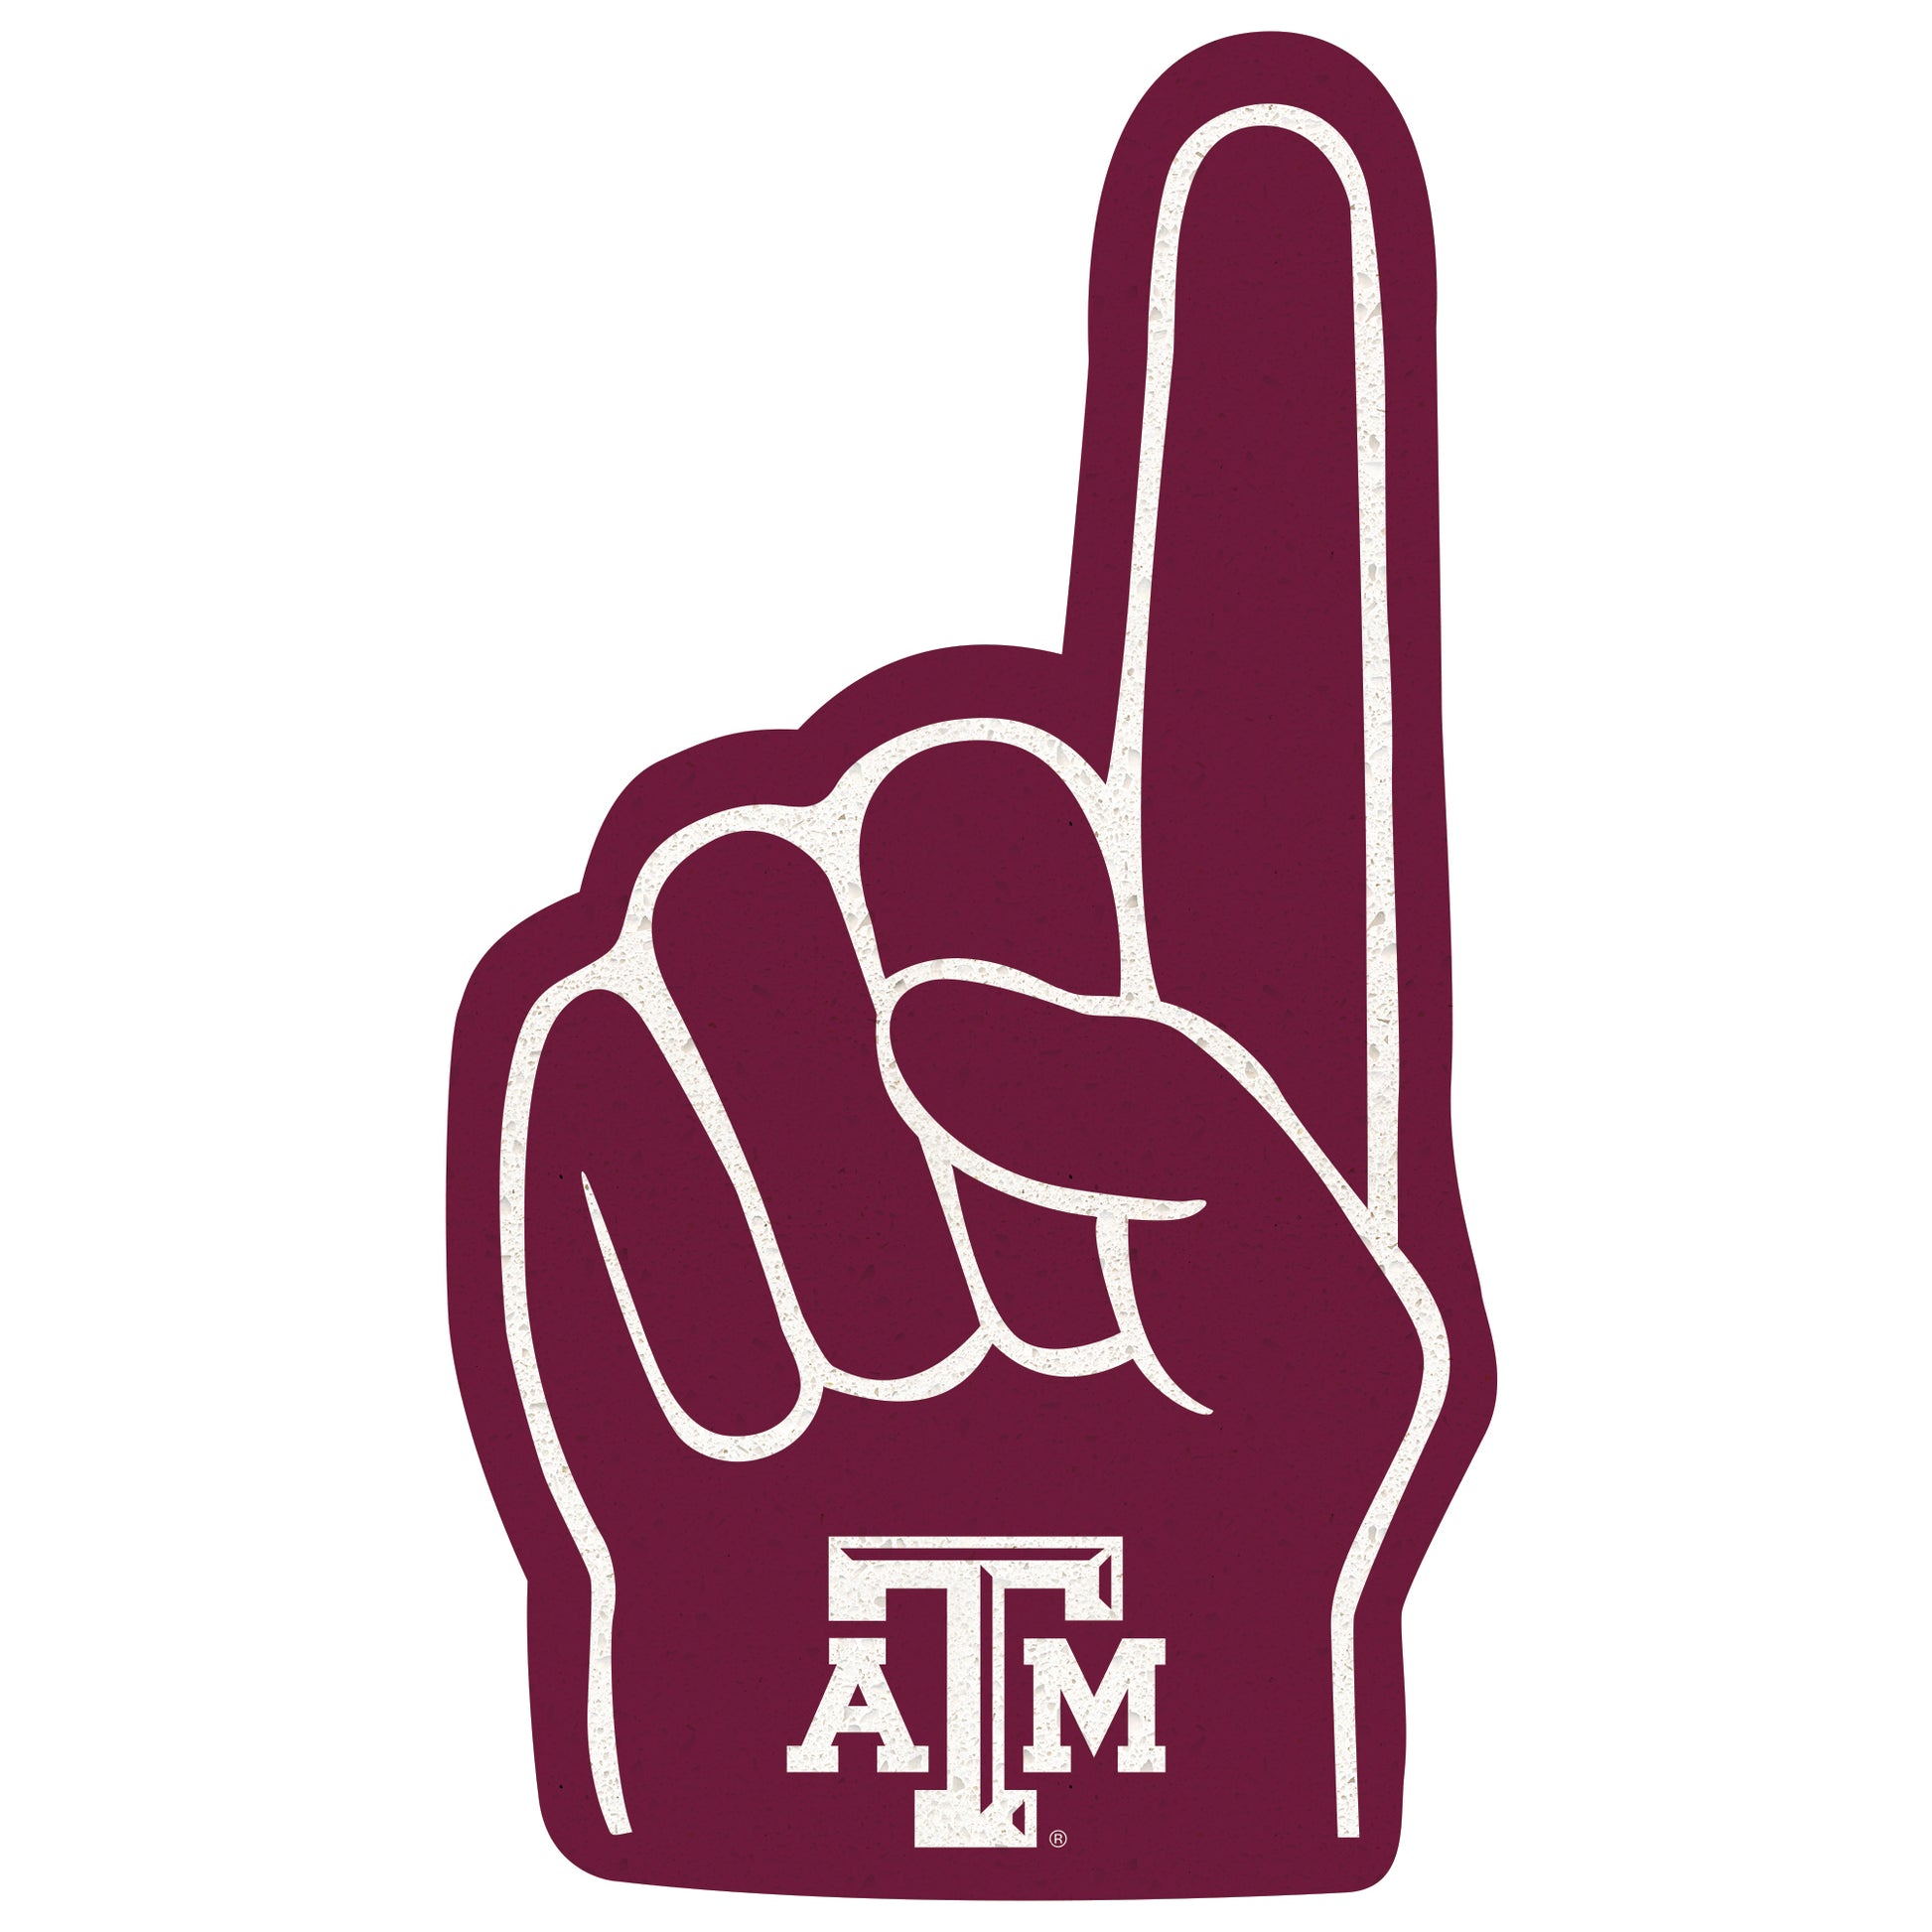 Texas A&M Aggies: 2021 Foam Finger - Officially Licensed NCAA